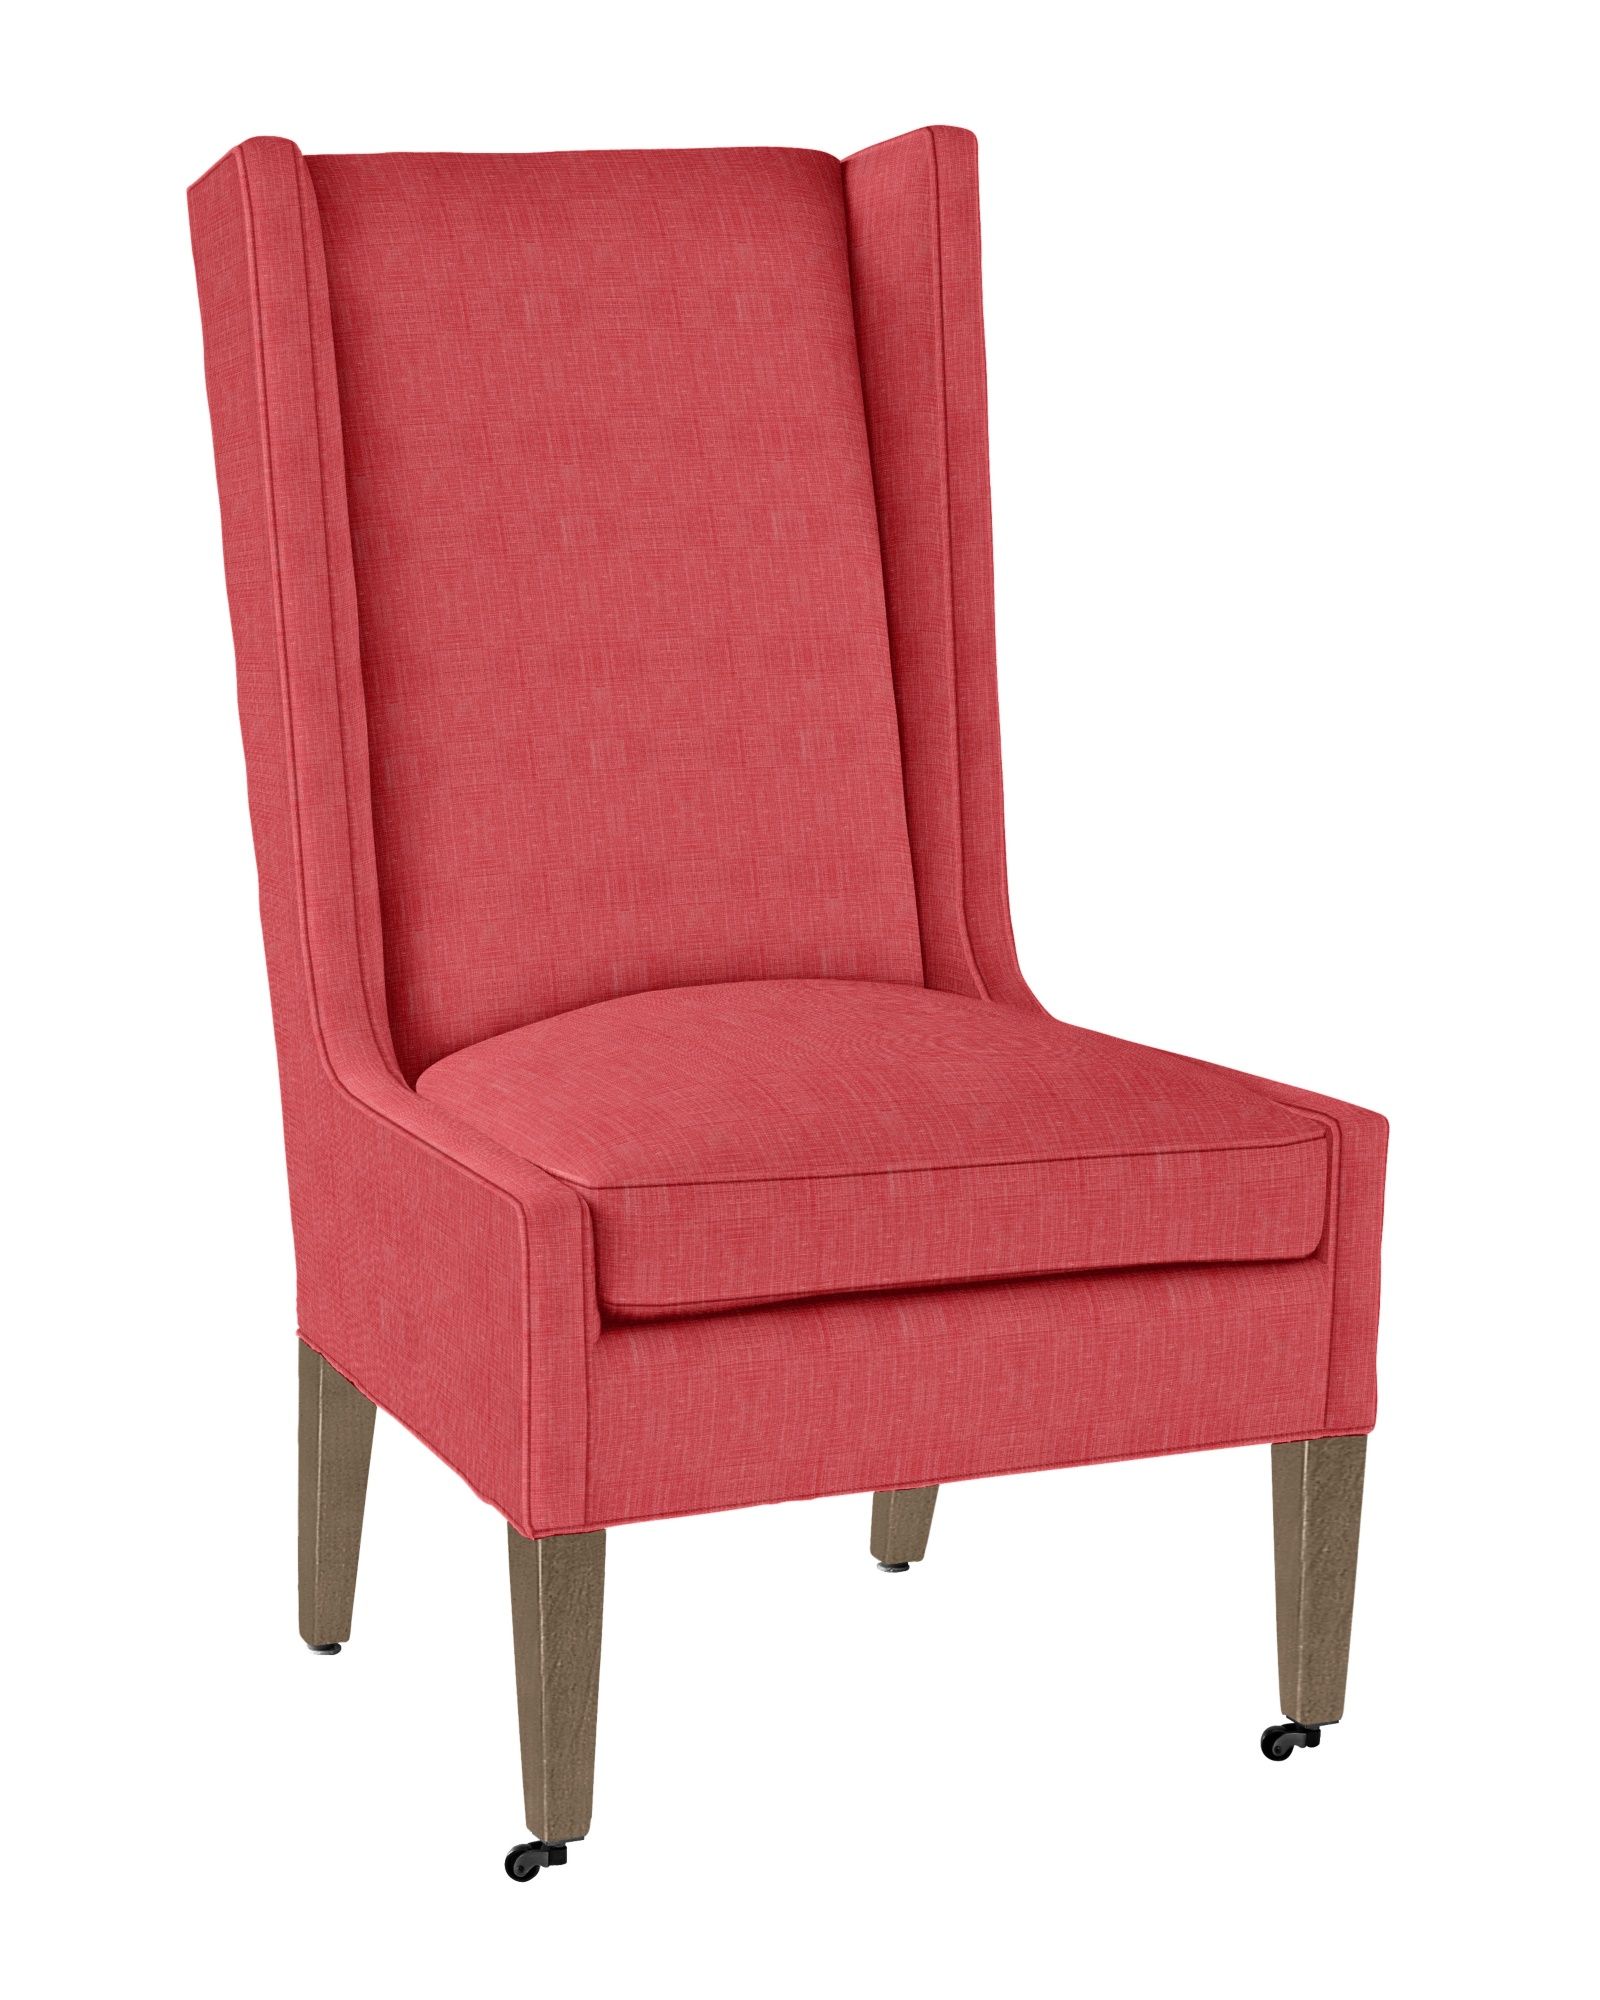 Plaza Chair | Serena and Lily